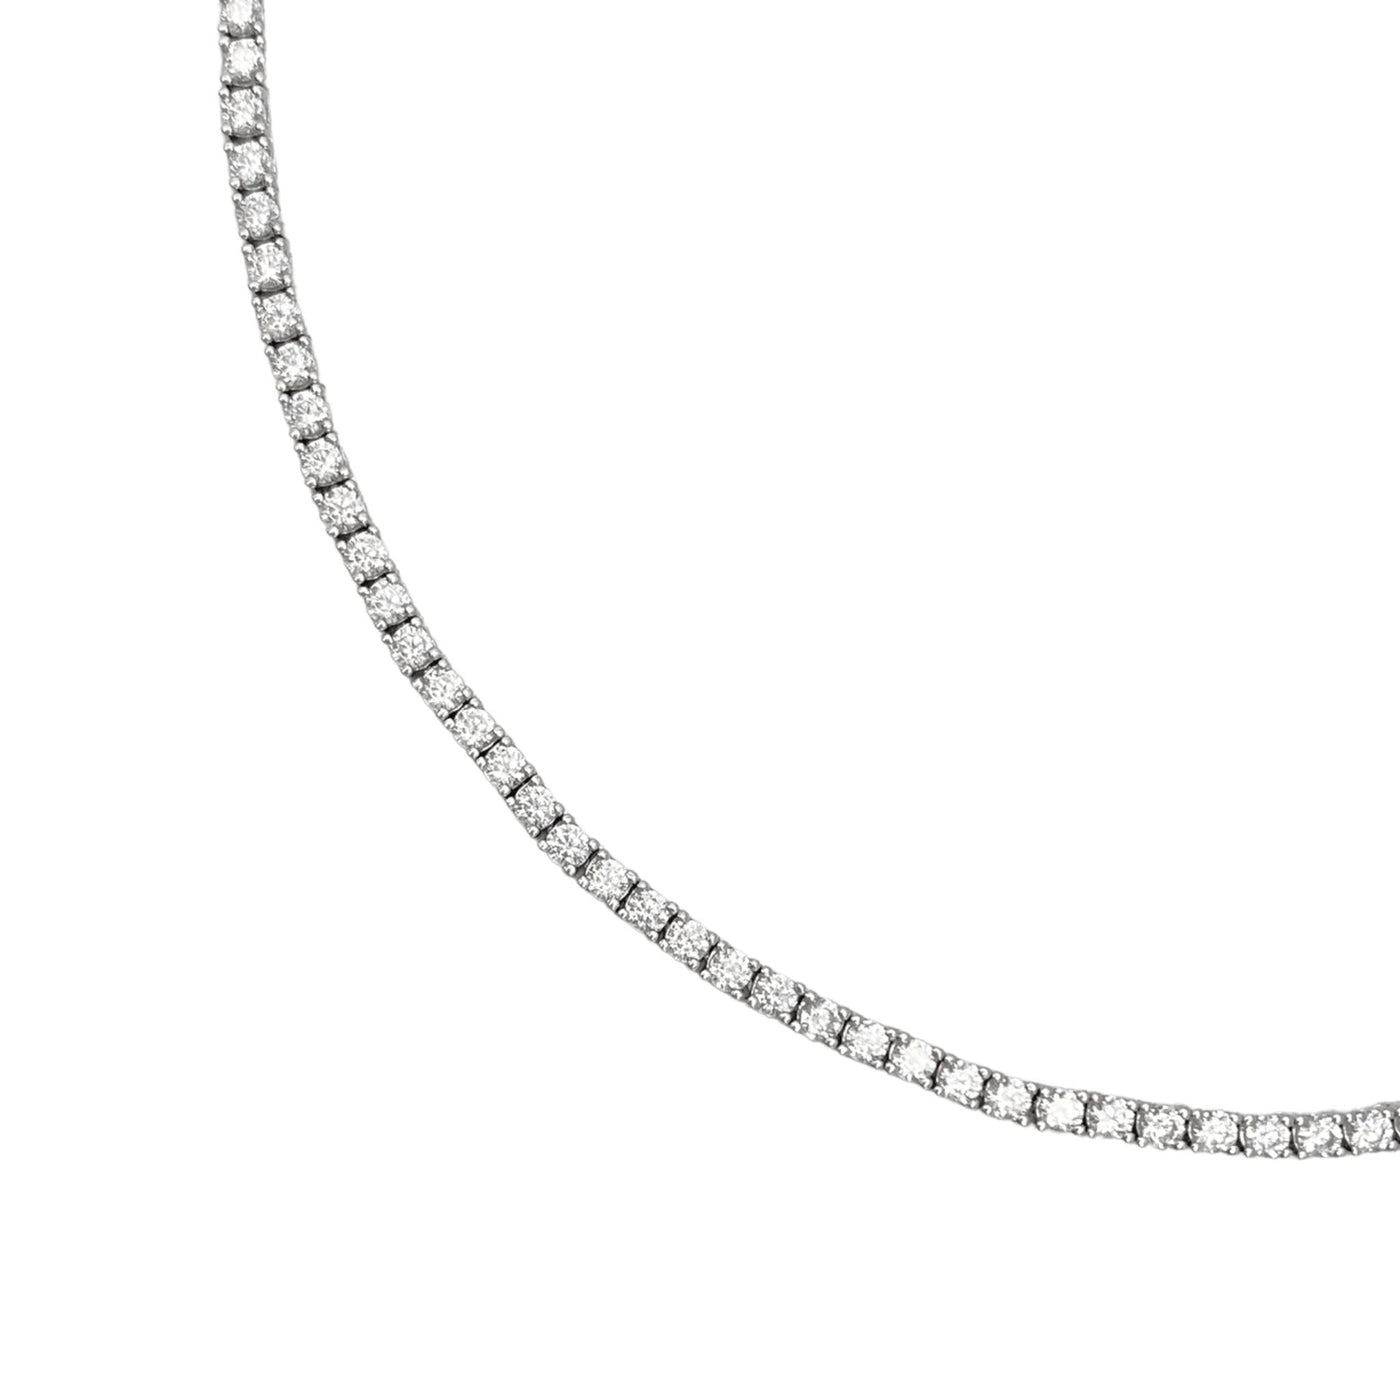 Silver casting tennis necklace with round white stones - 2.5 mm